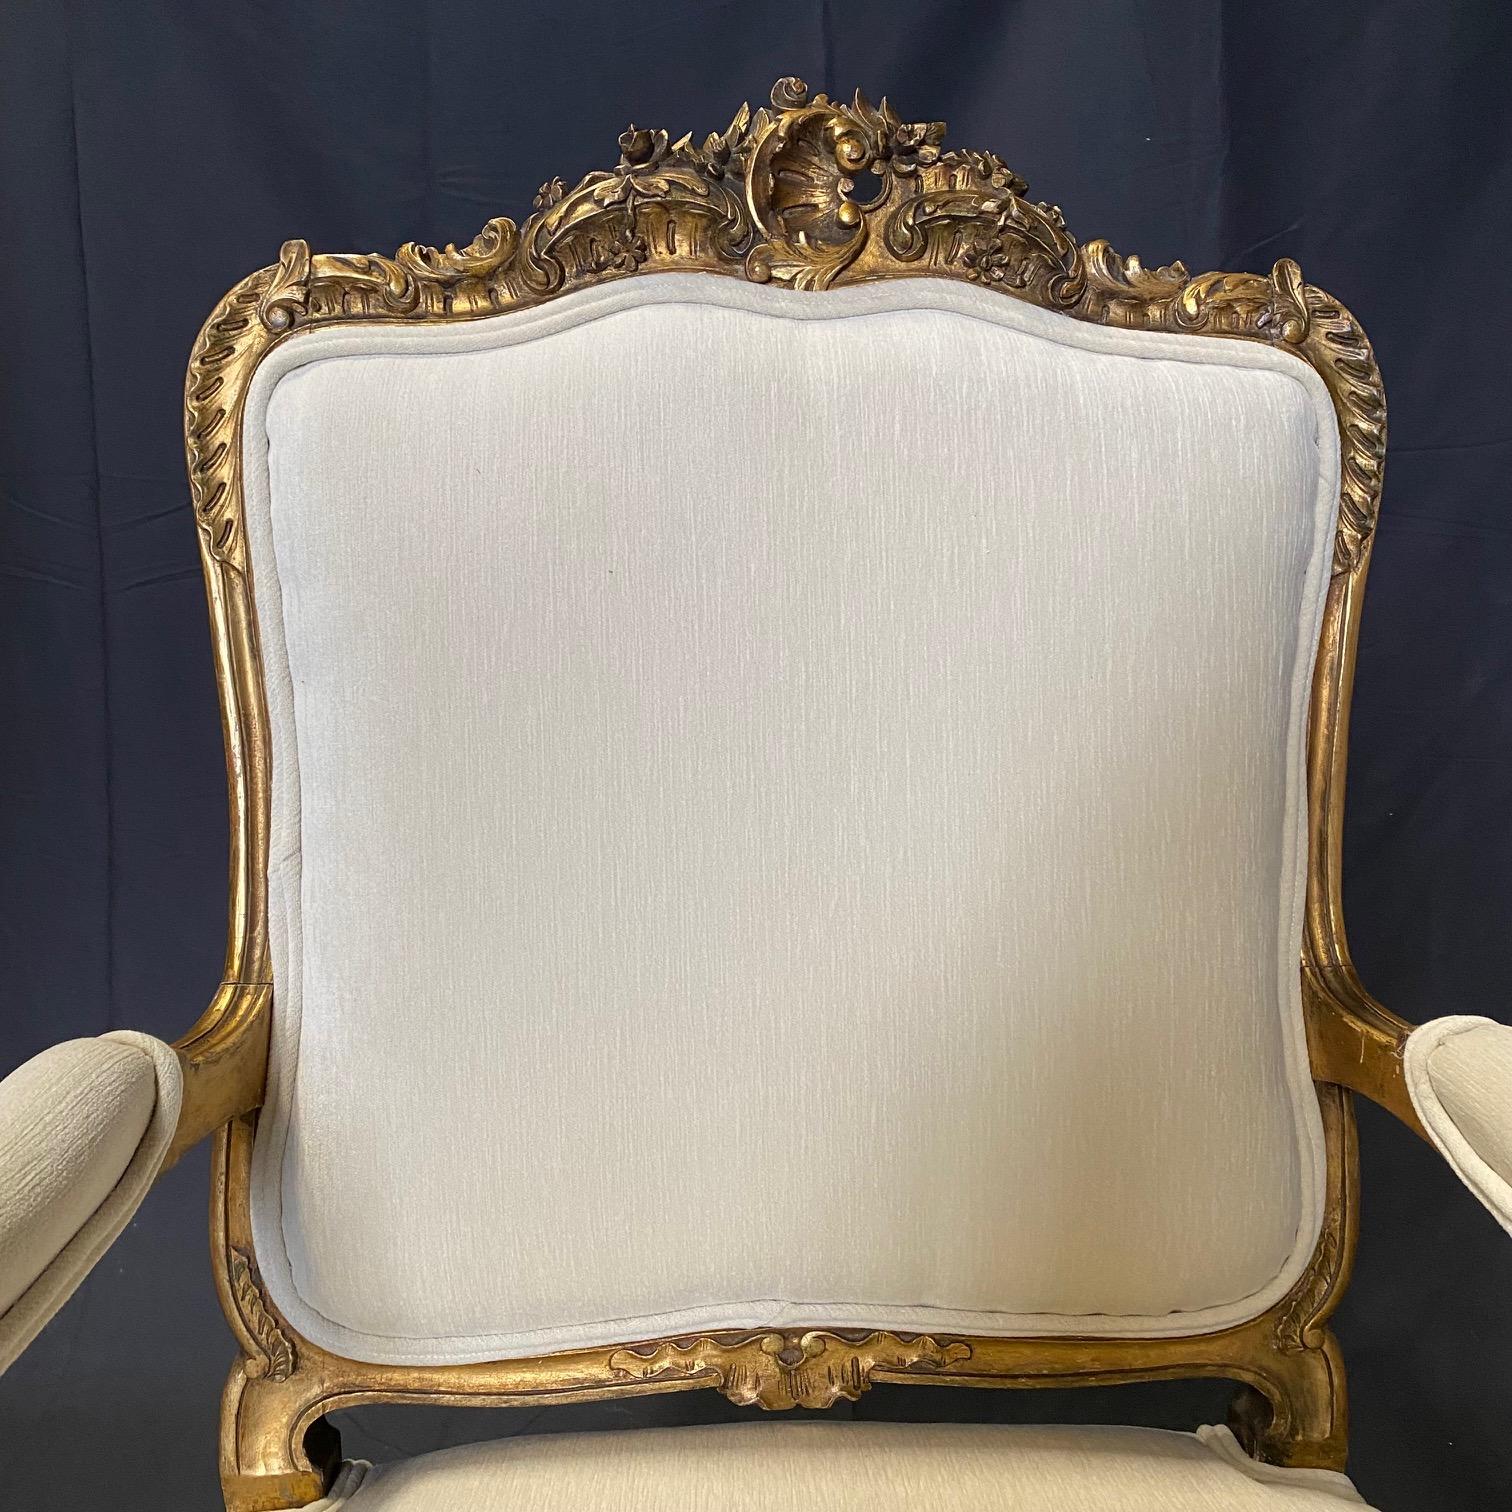  Pair of Antique French Louis XV Fauteuil Gilded Arm Chairs  6